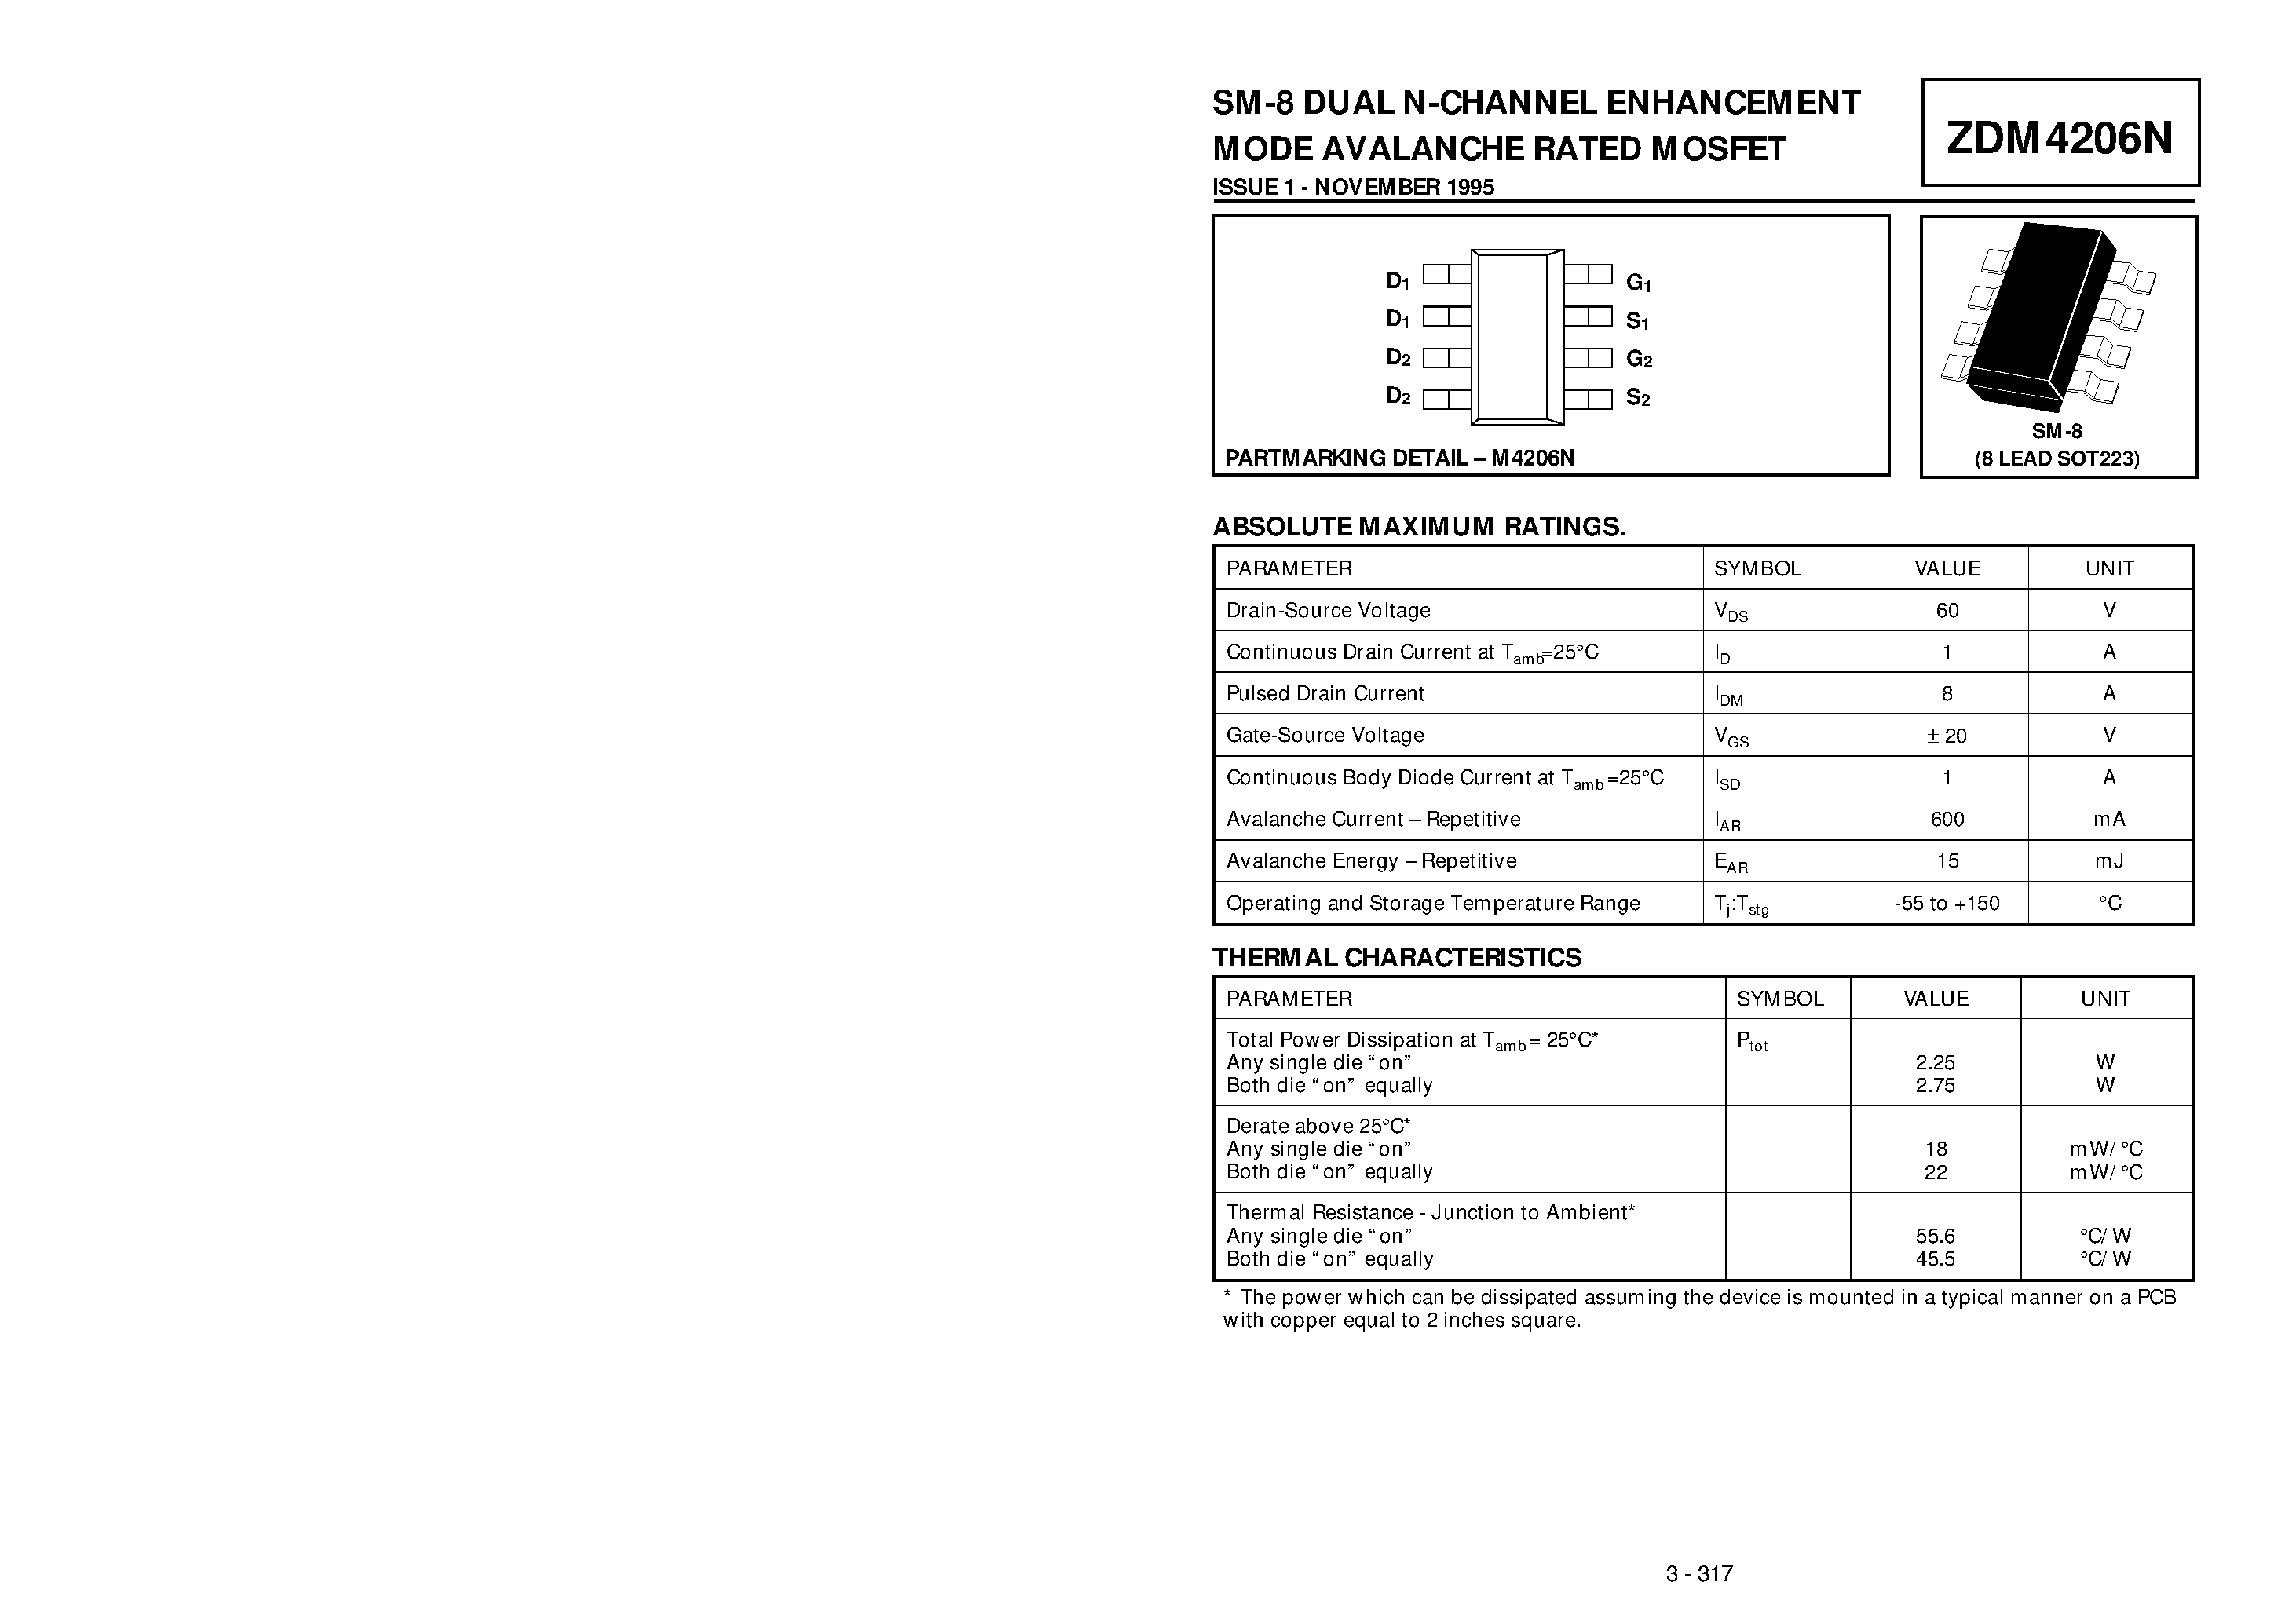 Datasheet ZDM4206N - DUAL N-CHANNEL ENHANCEMENT MODE AVALANCHE RATED MOSFET page 1